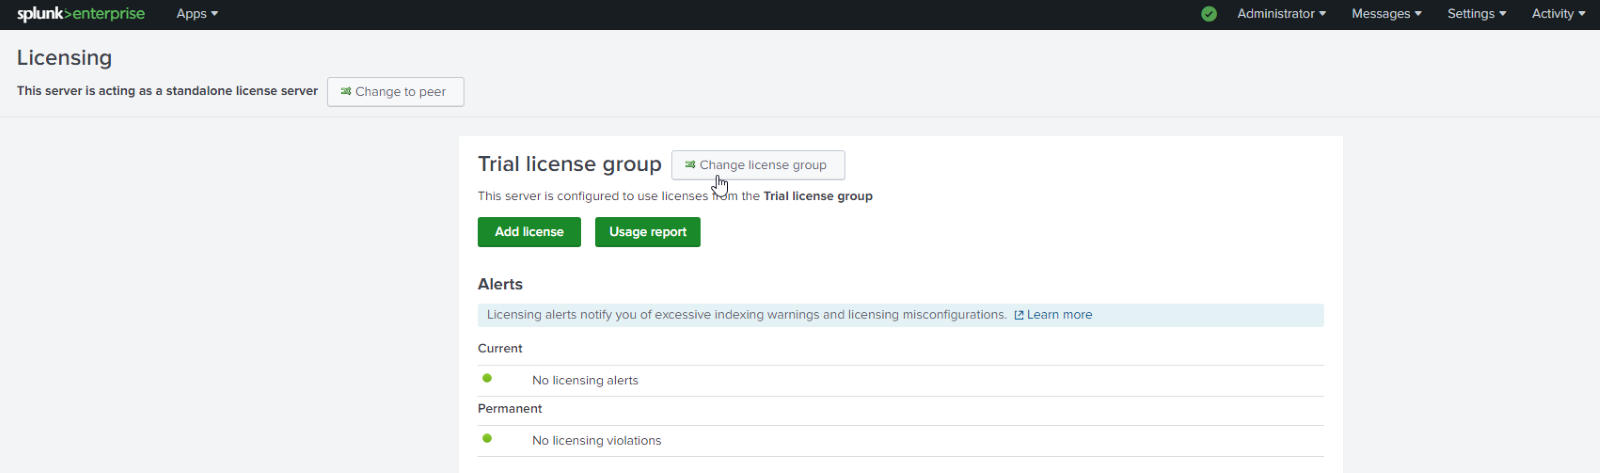 How to Switch to Splunk Free from Splunk Enterprise Step 3: Go to change license group